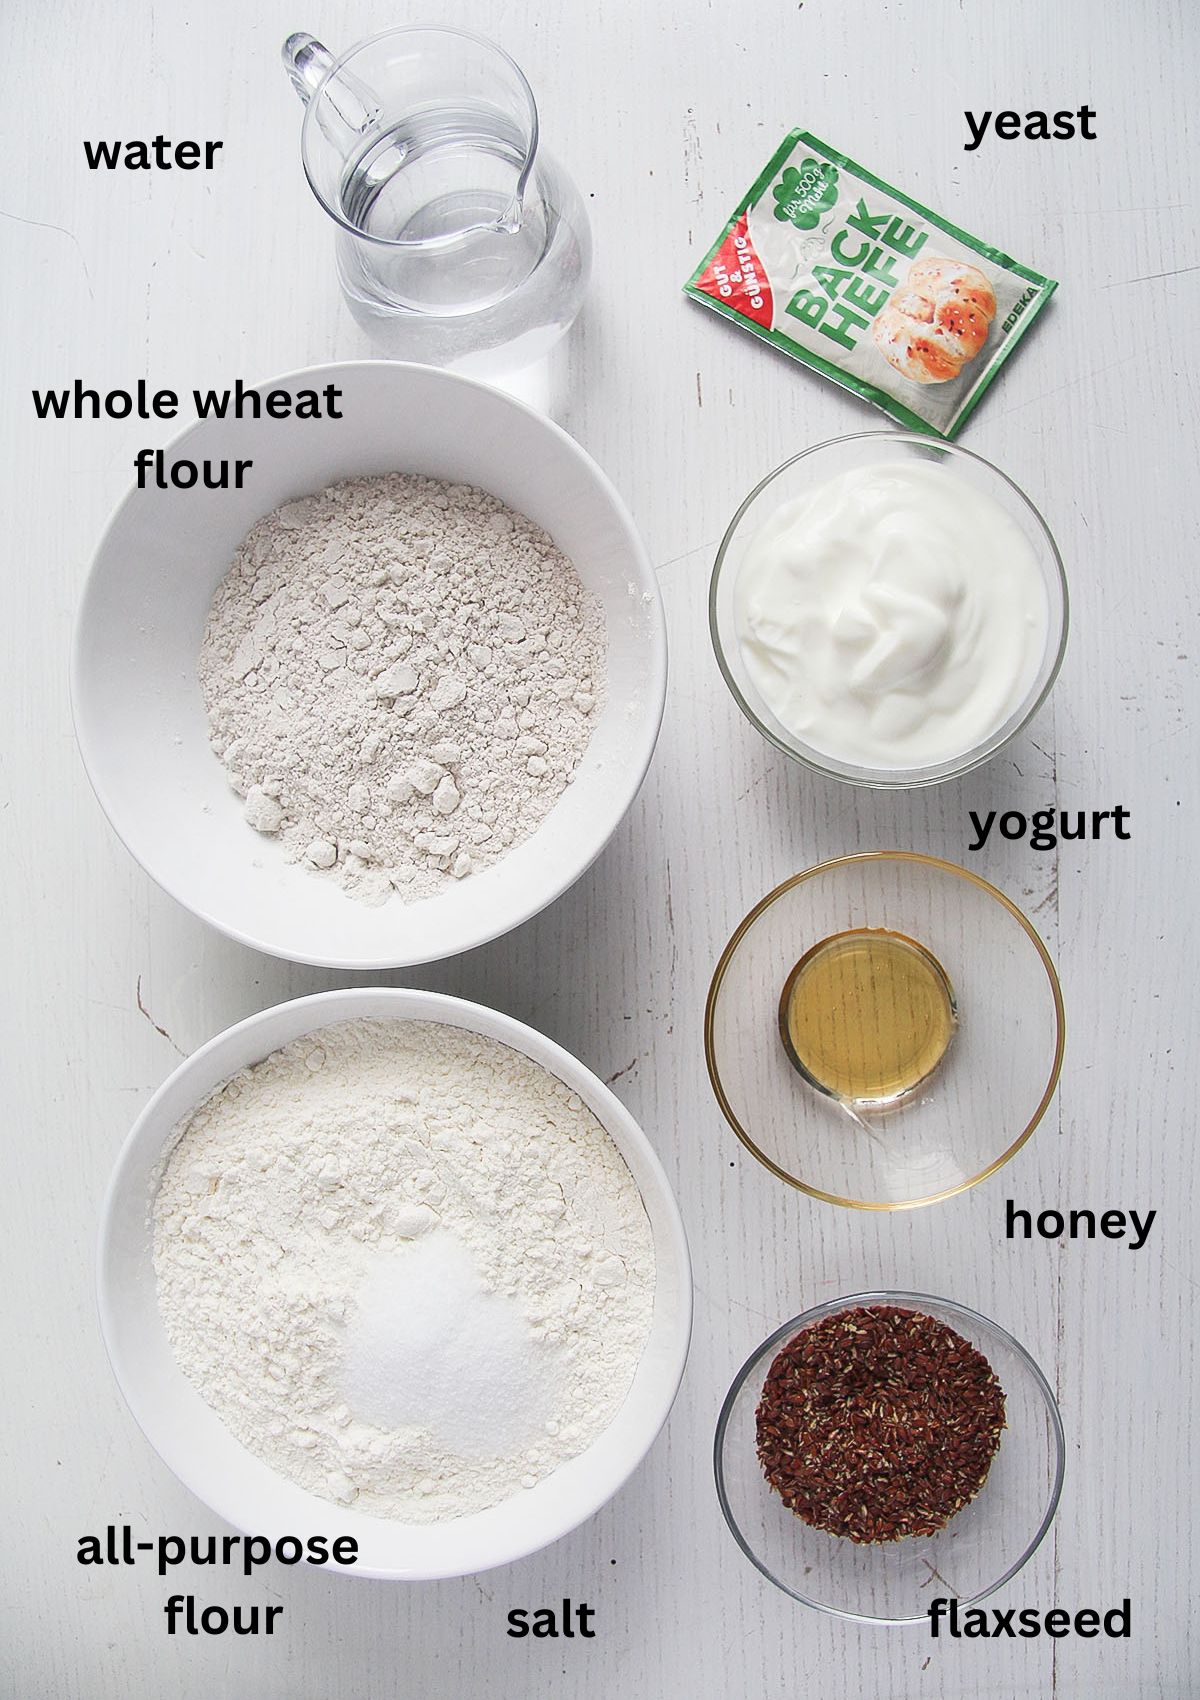 labeled ingredients for making bread with flaxseeds, yogurt, honey and yeast. 